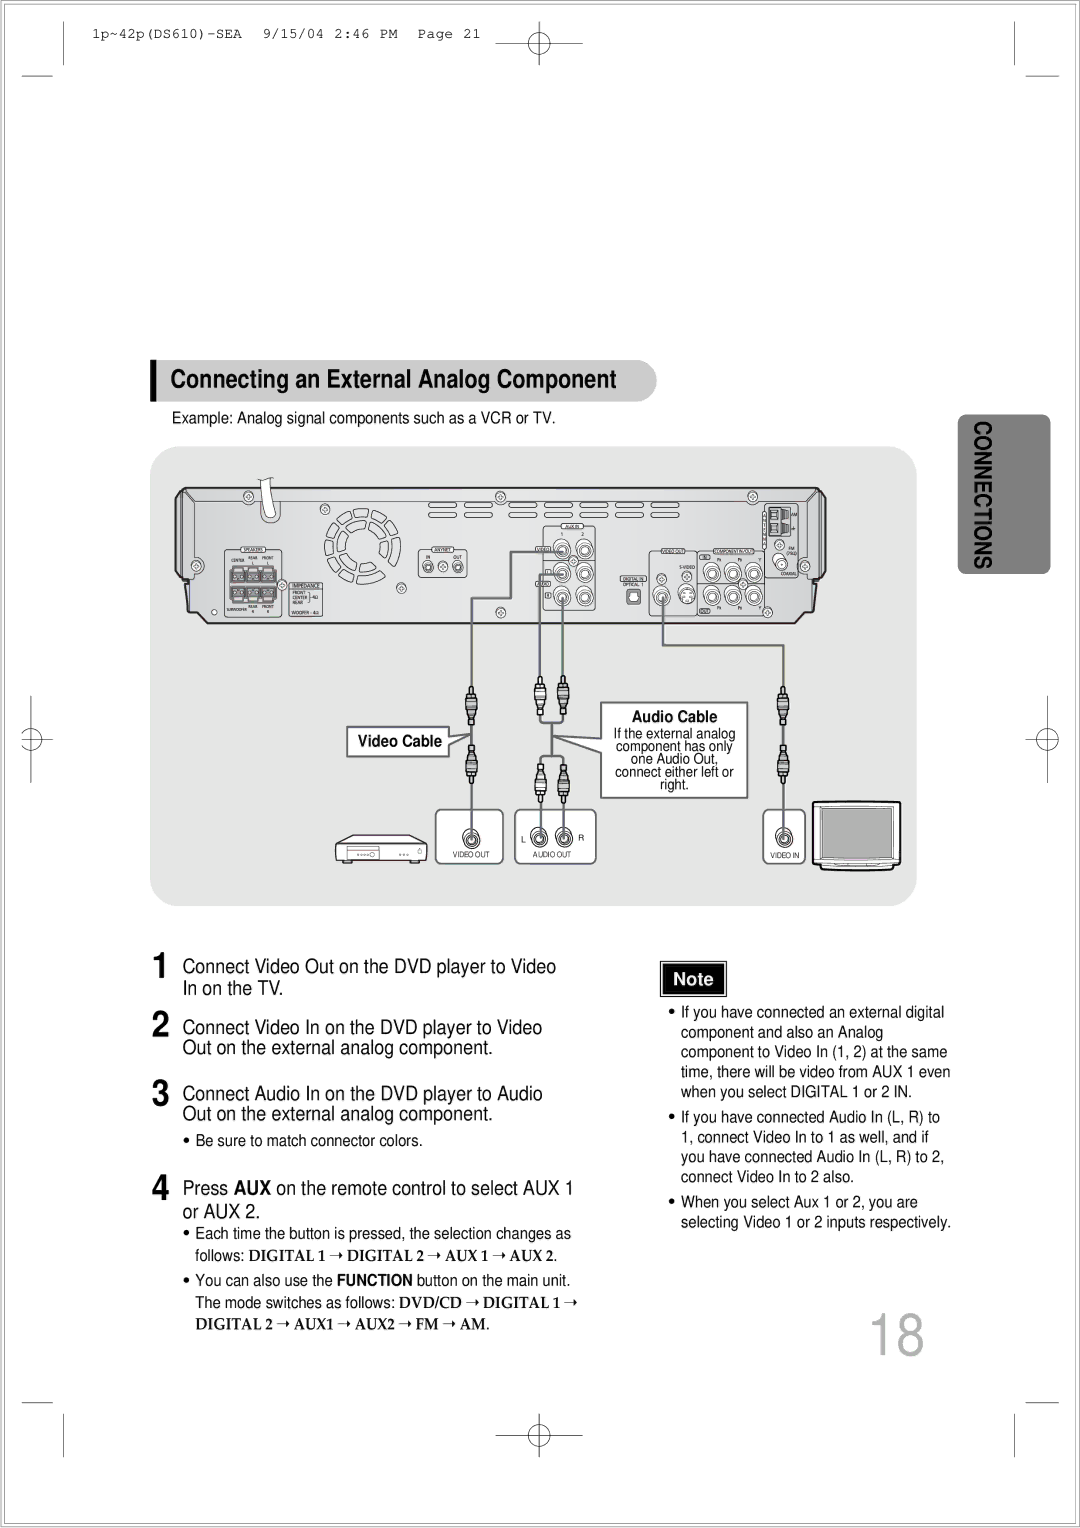 Samsung HT-DS610 instruction manual Connecting an External Analog Component, Video Cable 